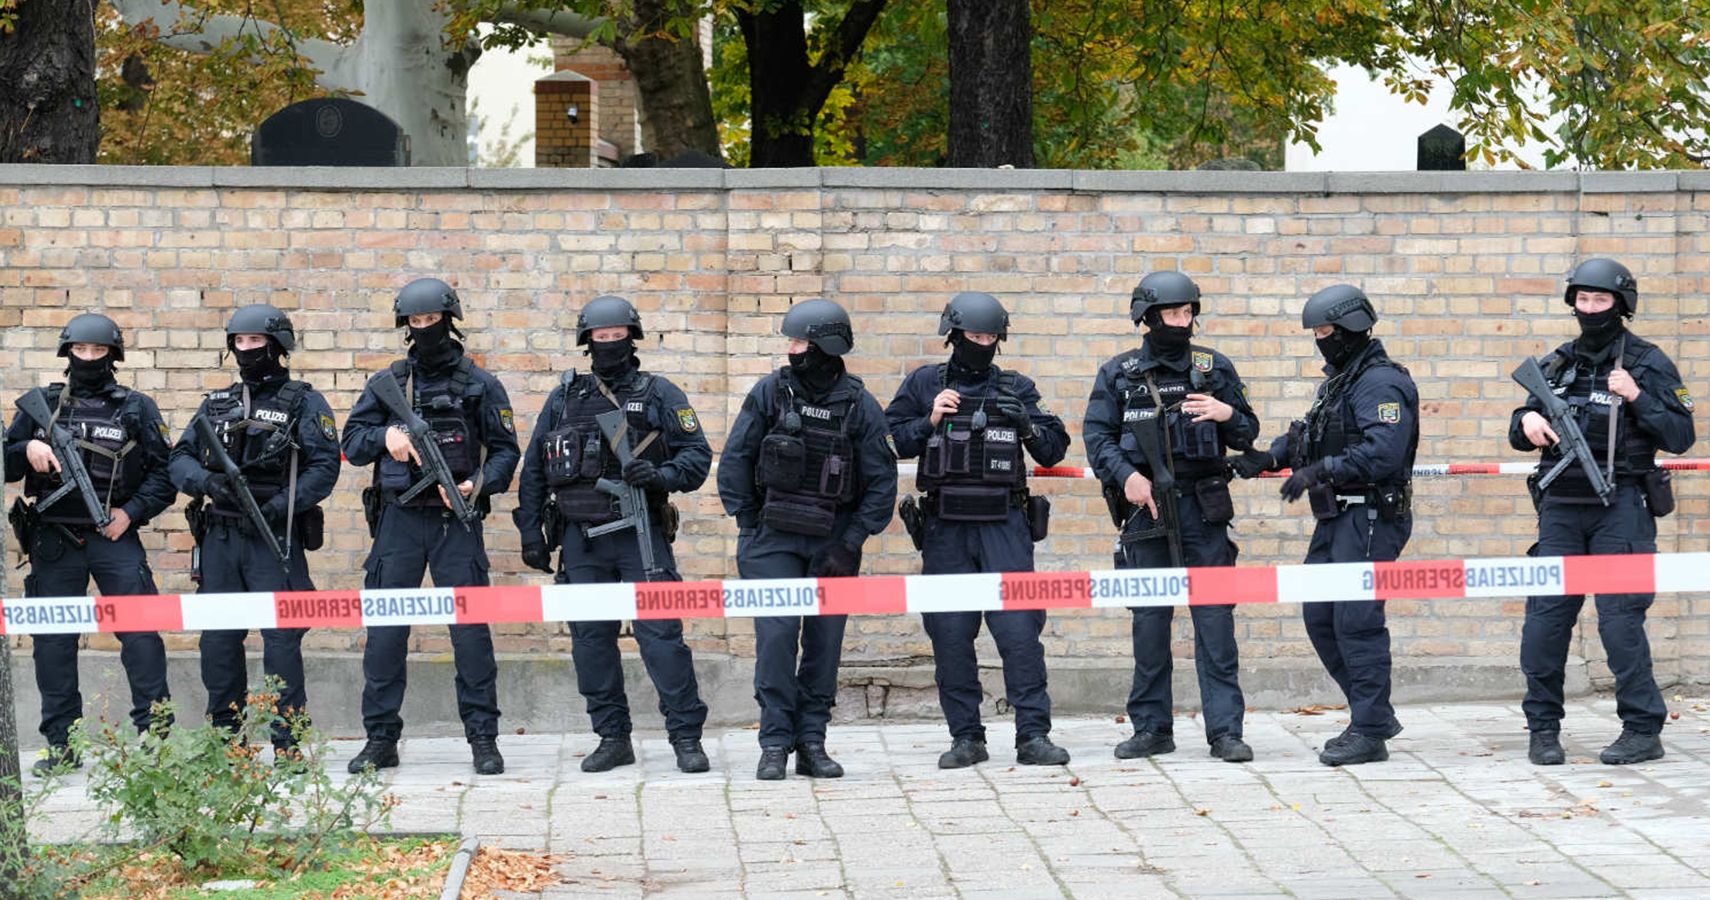 German Synagogue Attack Streamed On Twitch